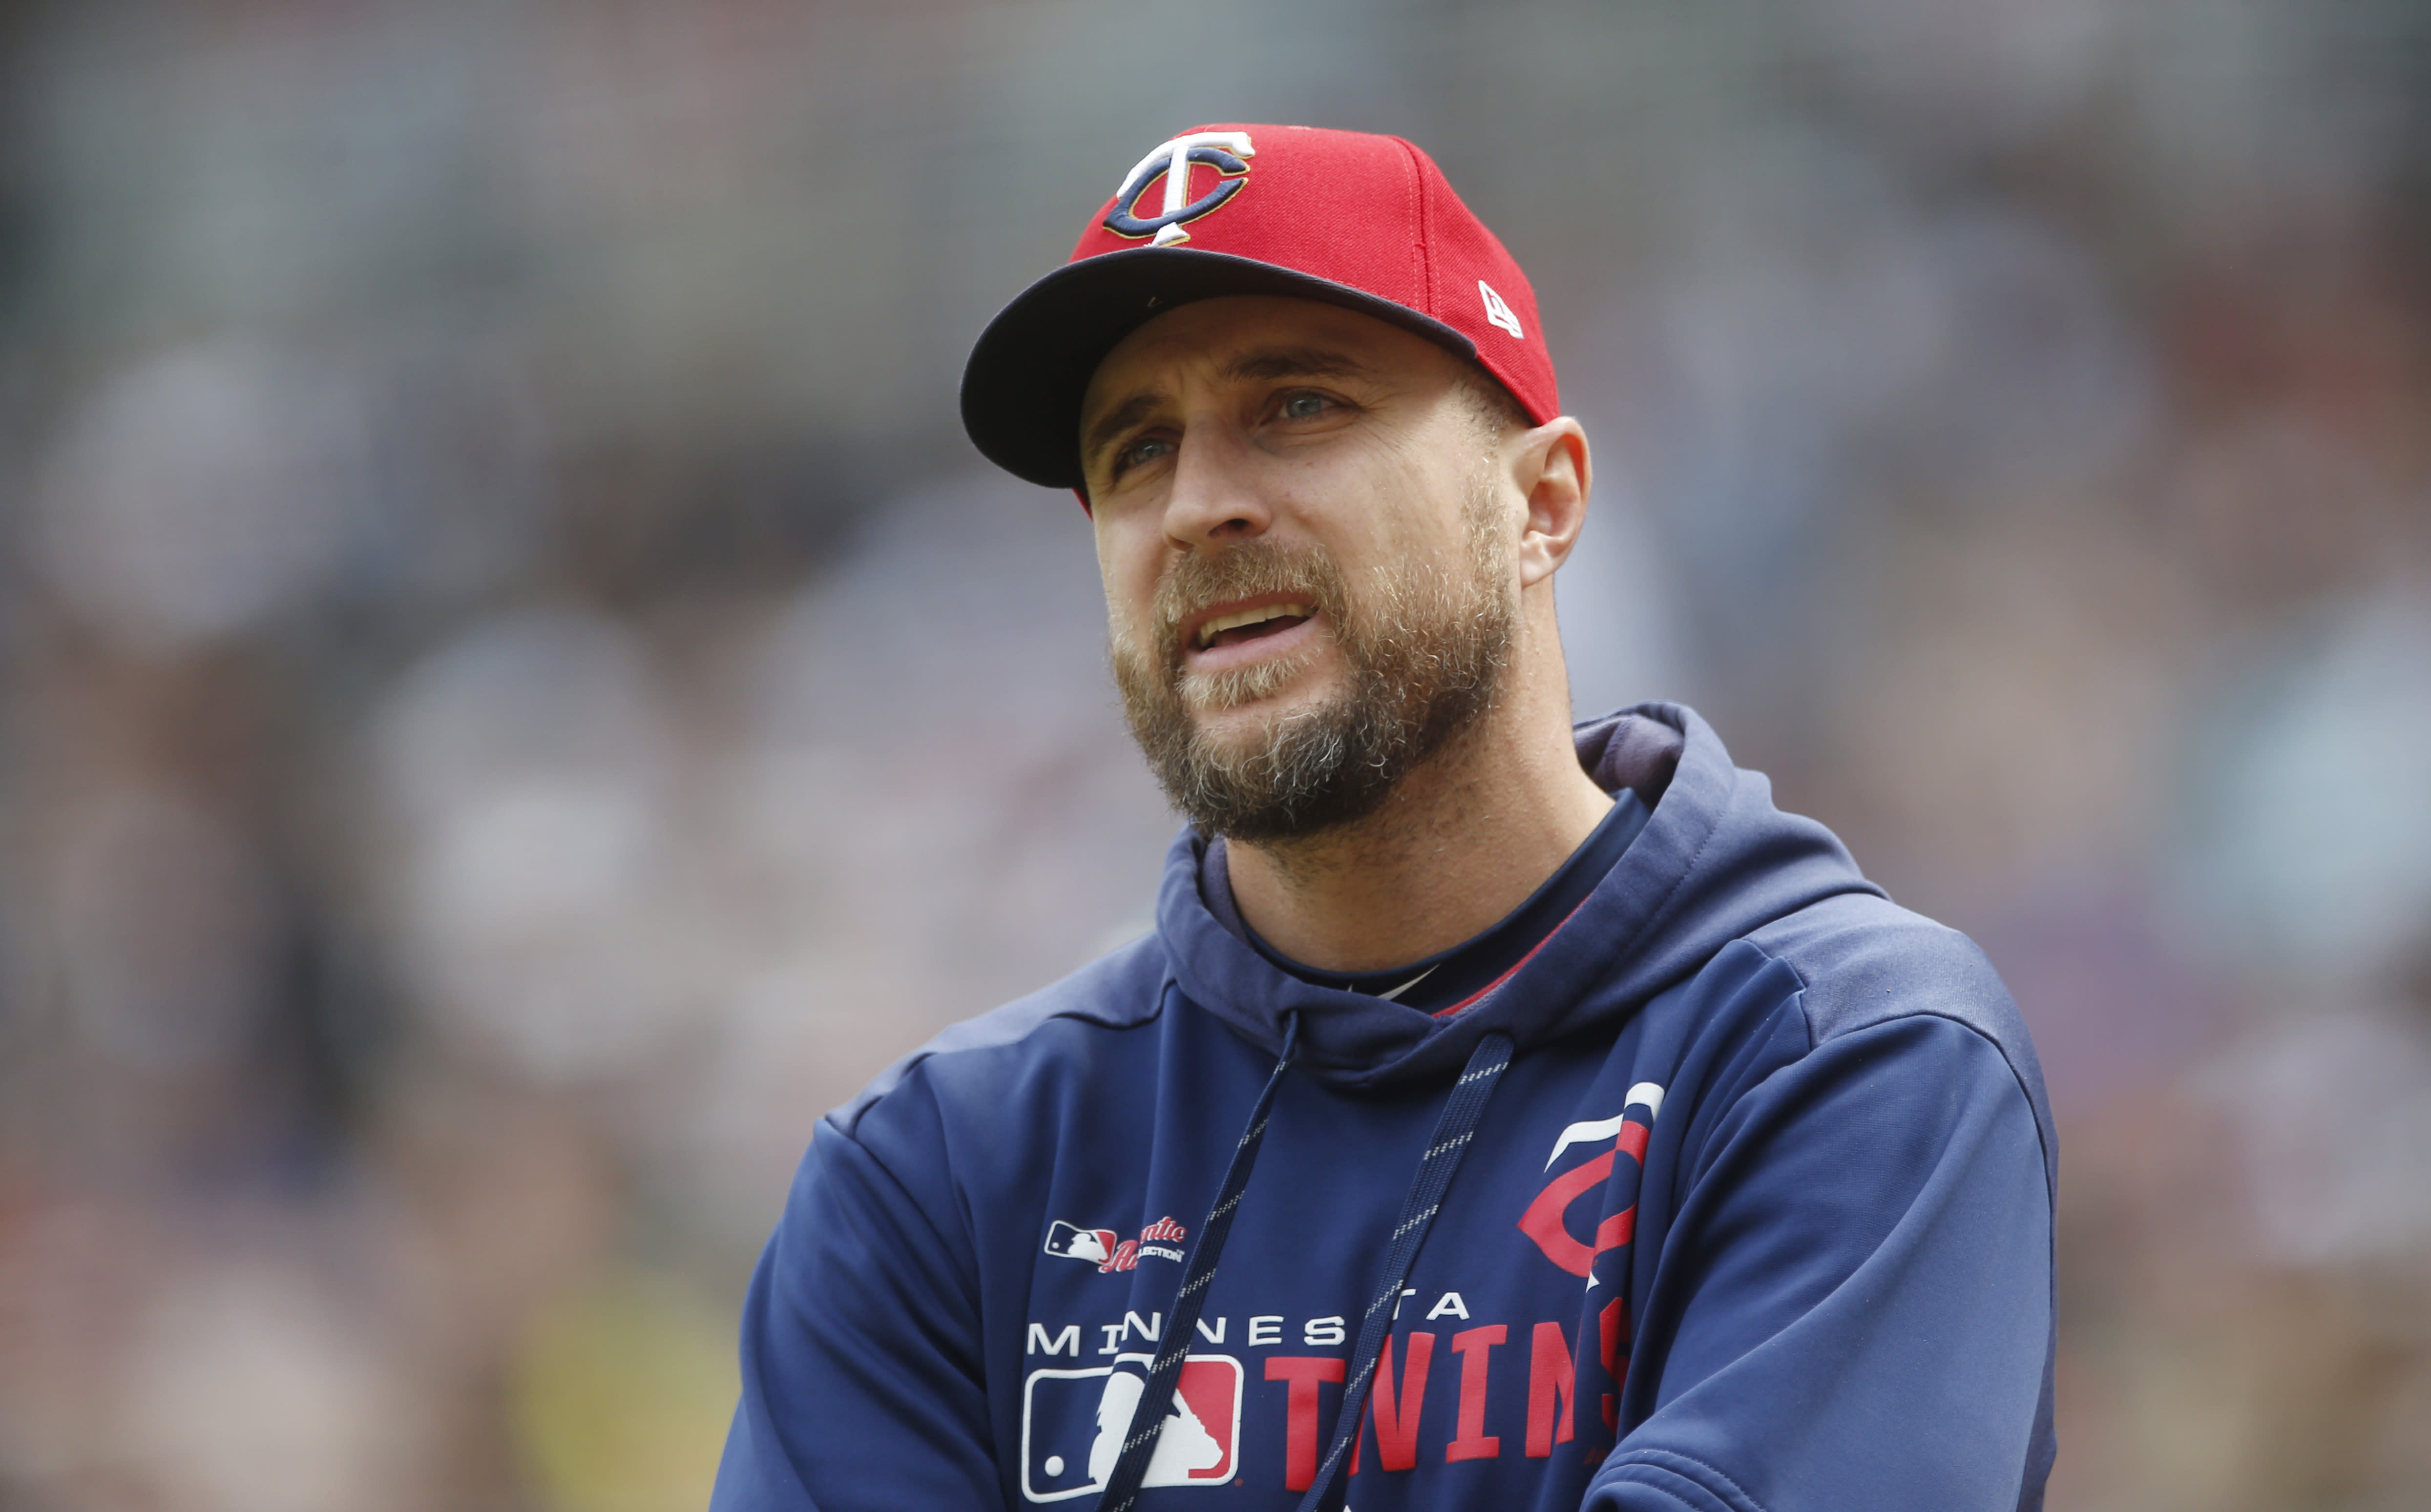 Rocco Baldelli of Twins wins AL Manager of the Year